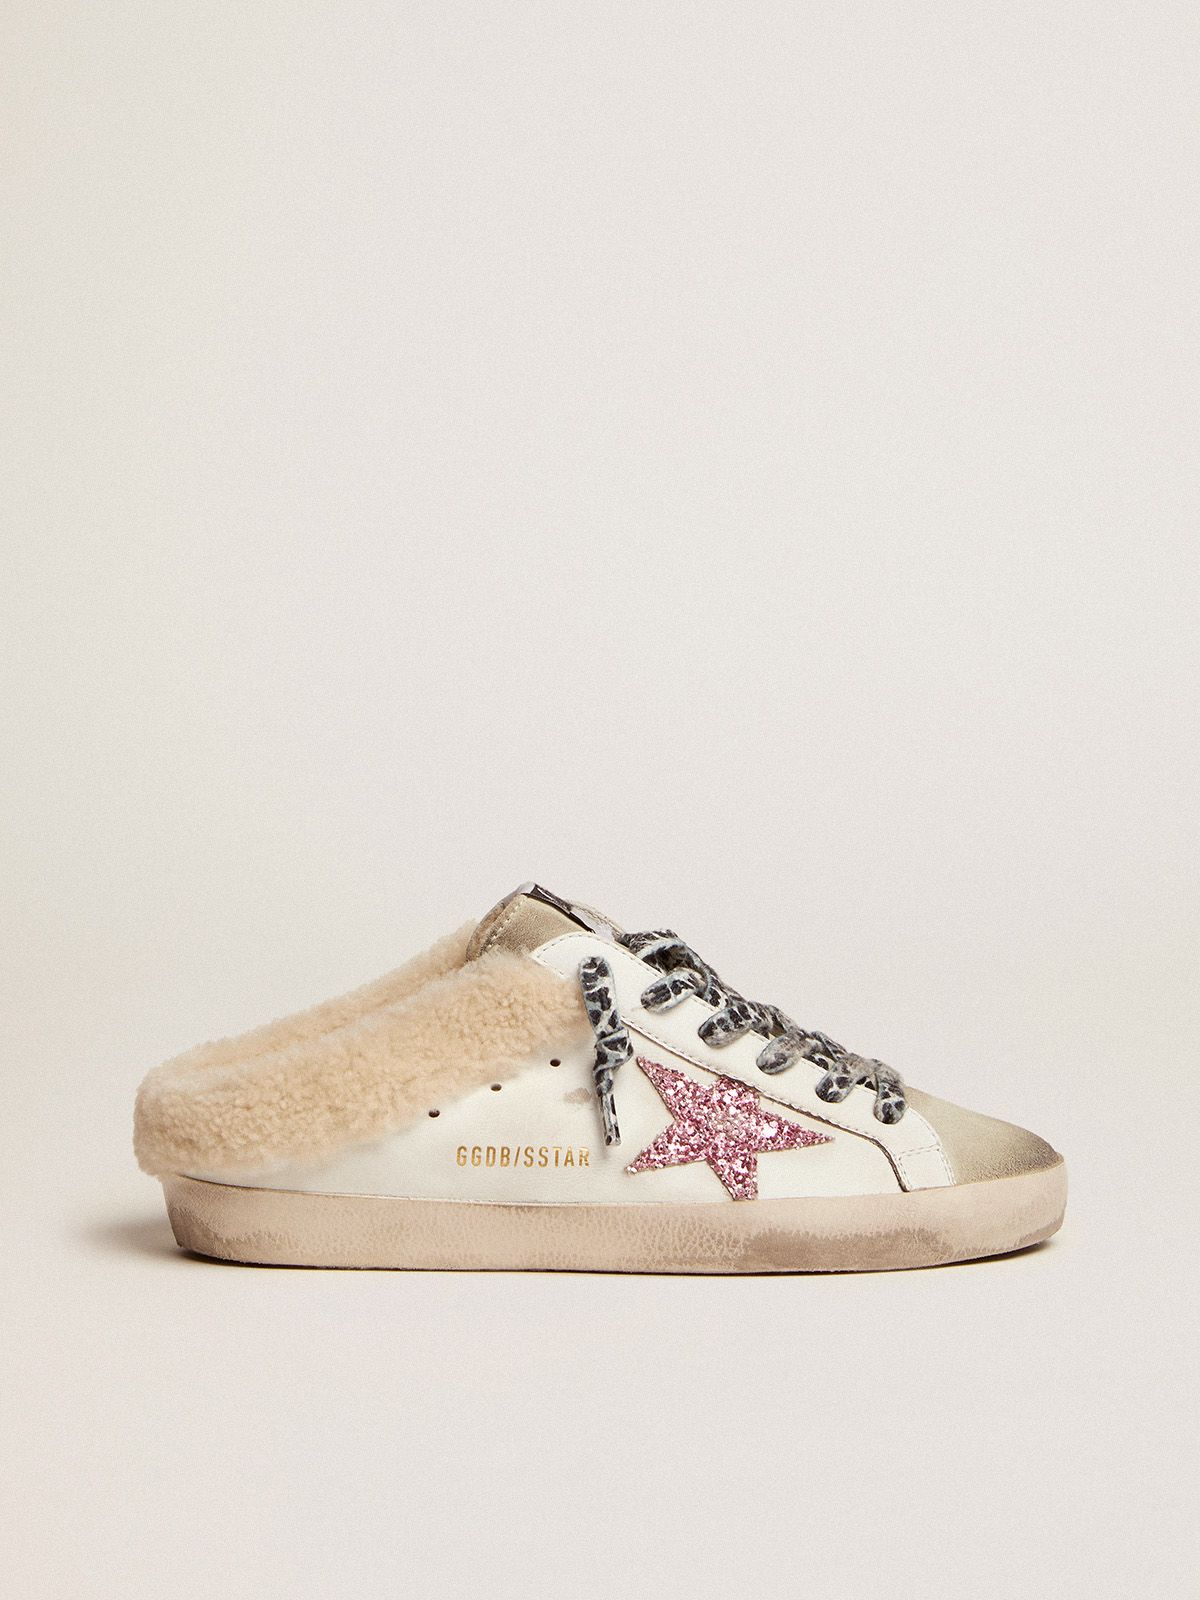 golden goose glitter lining shearling and Sabots pink with star Super-Star